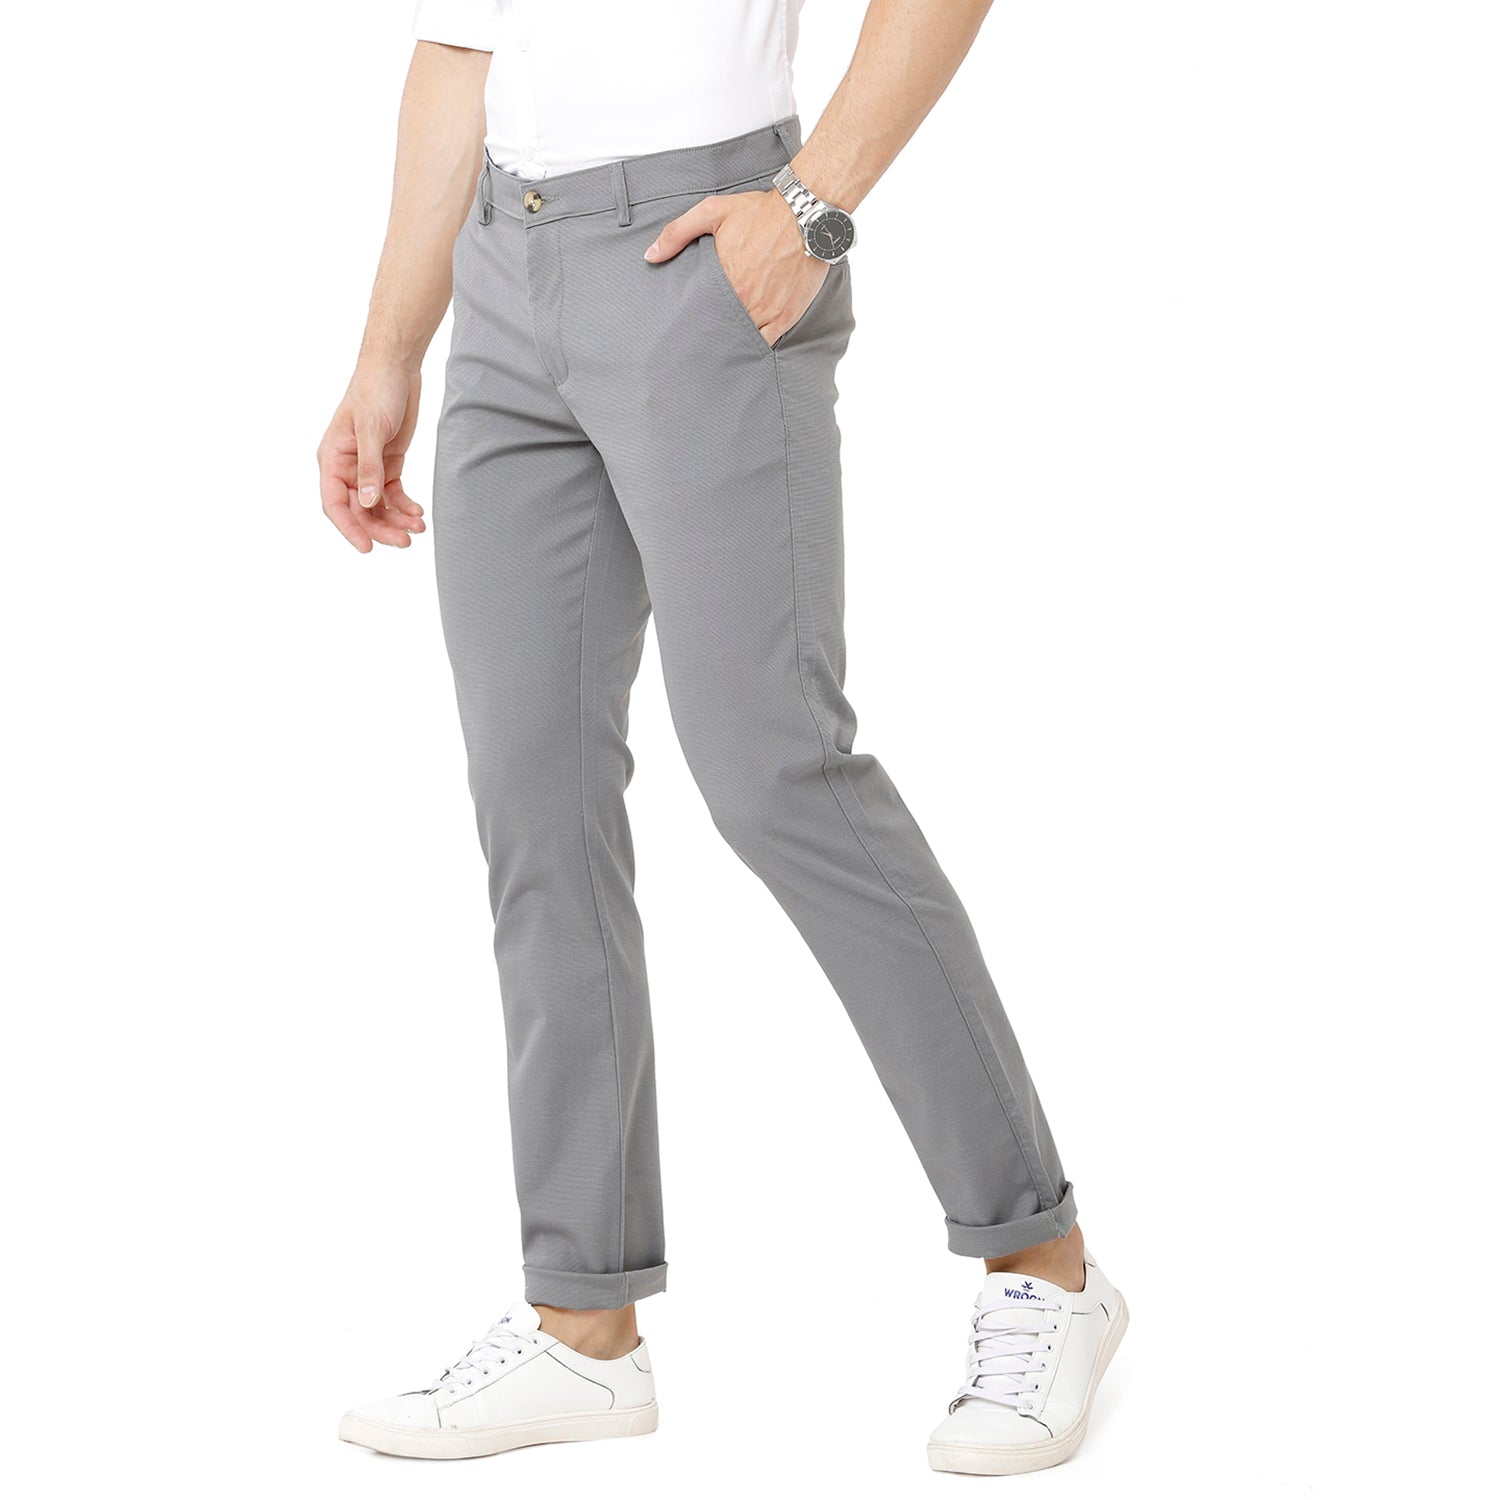 Classic Polo Mens 100% Cotton Solid Moderate Fit Grey Color Trousers - TN1-10 B-GRY classic polo trousers Classic Polo 